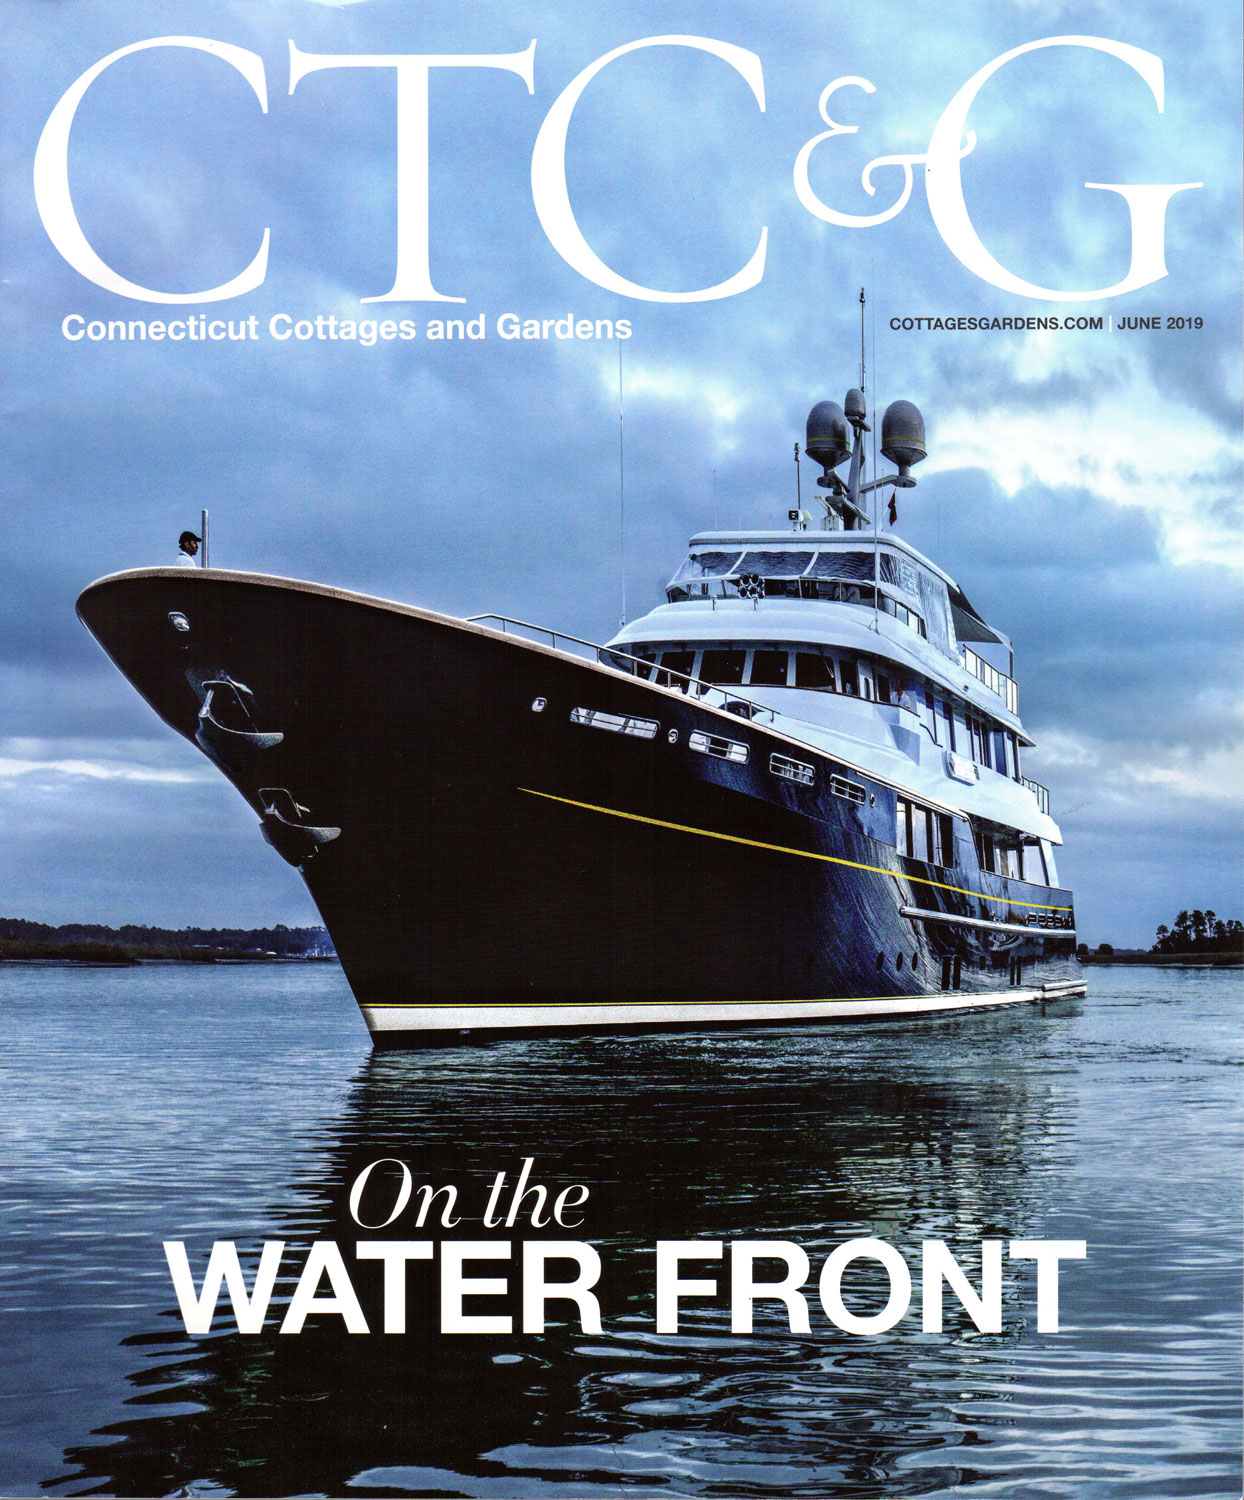 Motor Yacht Calliope graces the cover of CTC&C magazine, this Ron Holland Design yacht is ready to sail the oceans